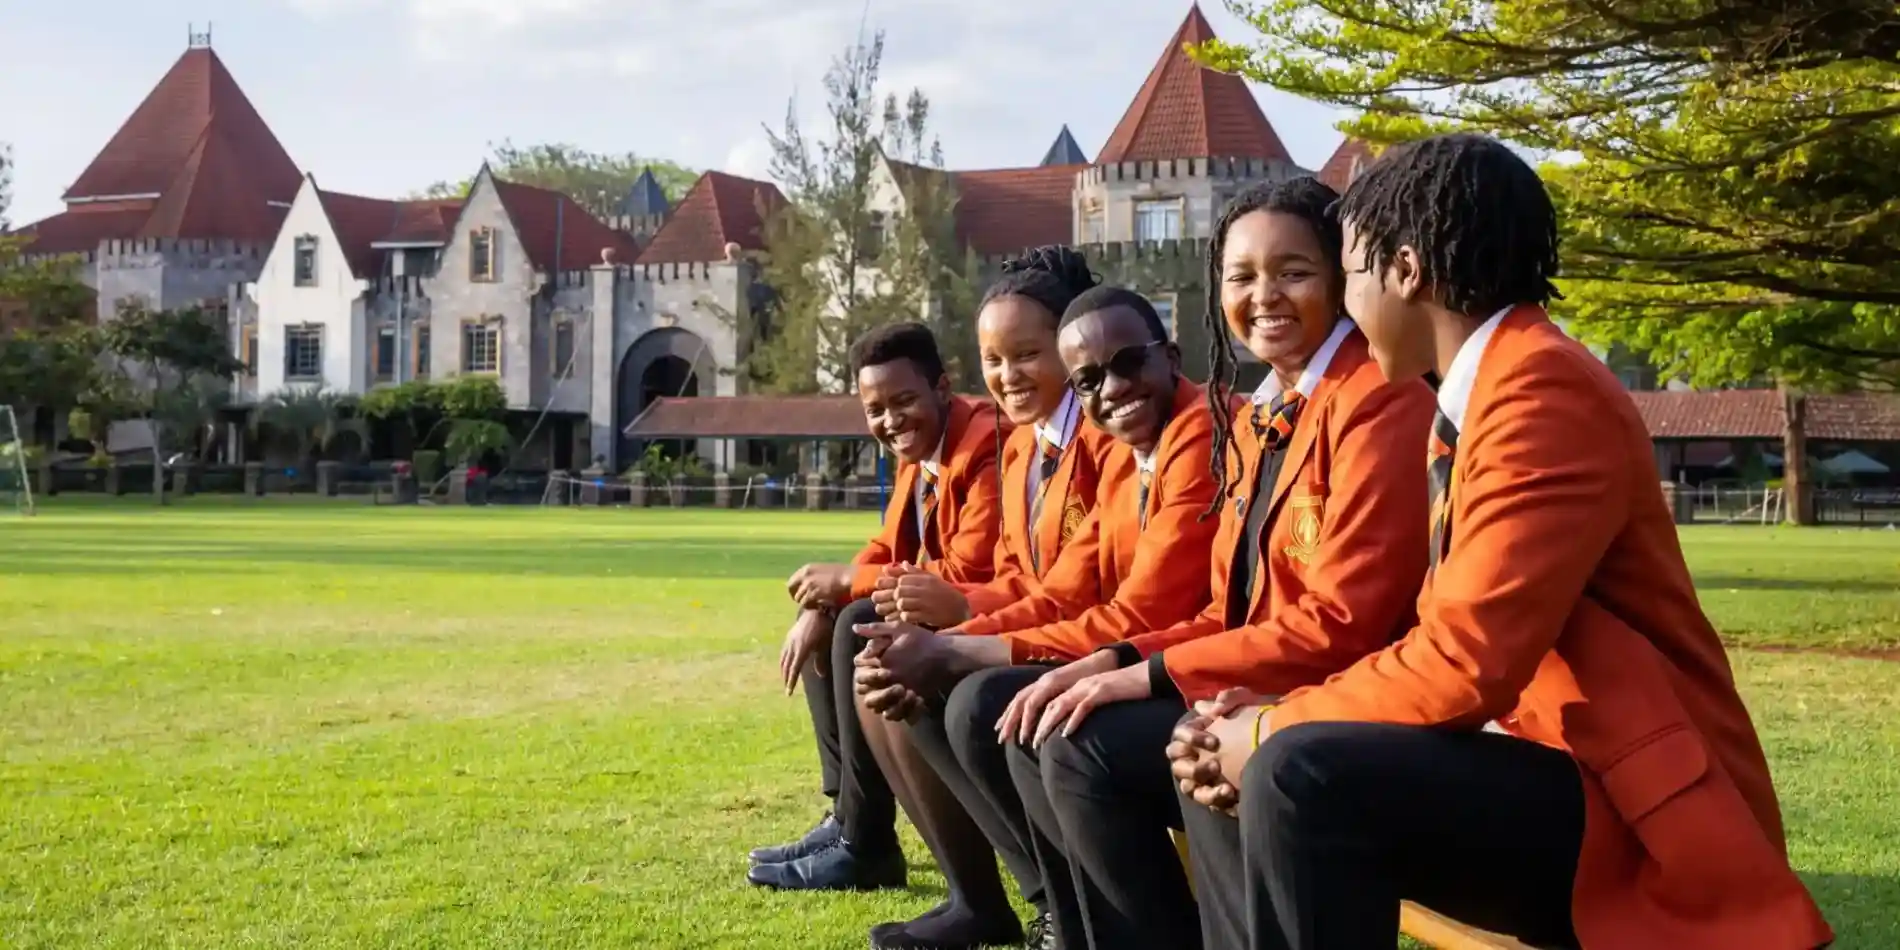 Brookhouse School Featured Image brookhouse-school-featured-photo Brookhouse School